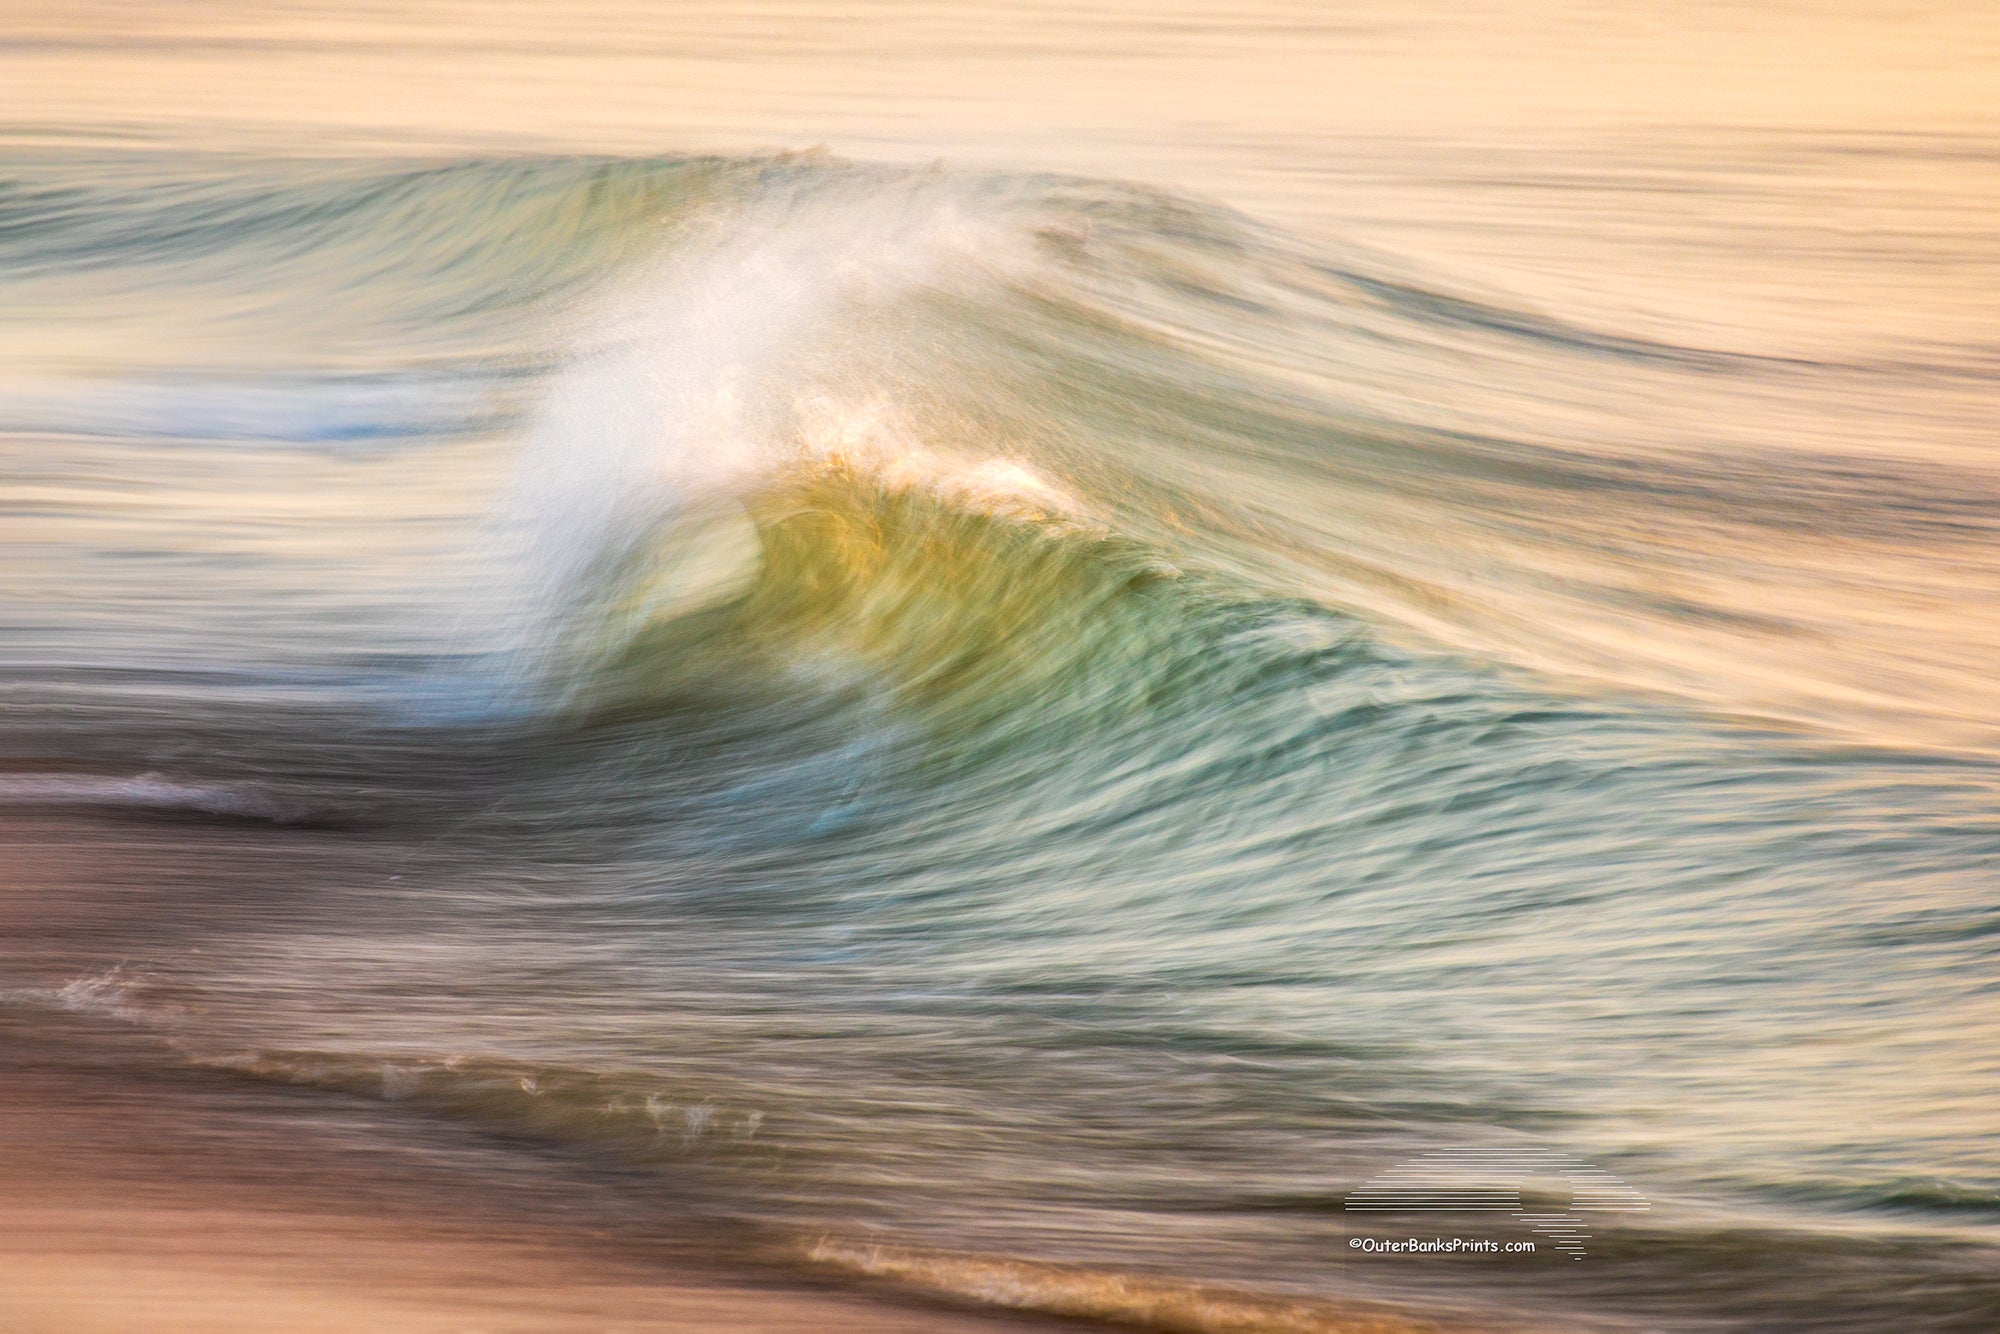 Impression of motion in the early morning surf on the beach at Kitty Hawk on the Outer Banks of NC.